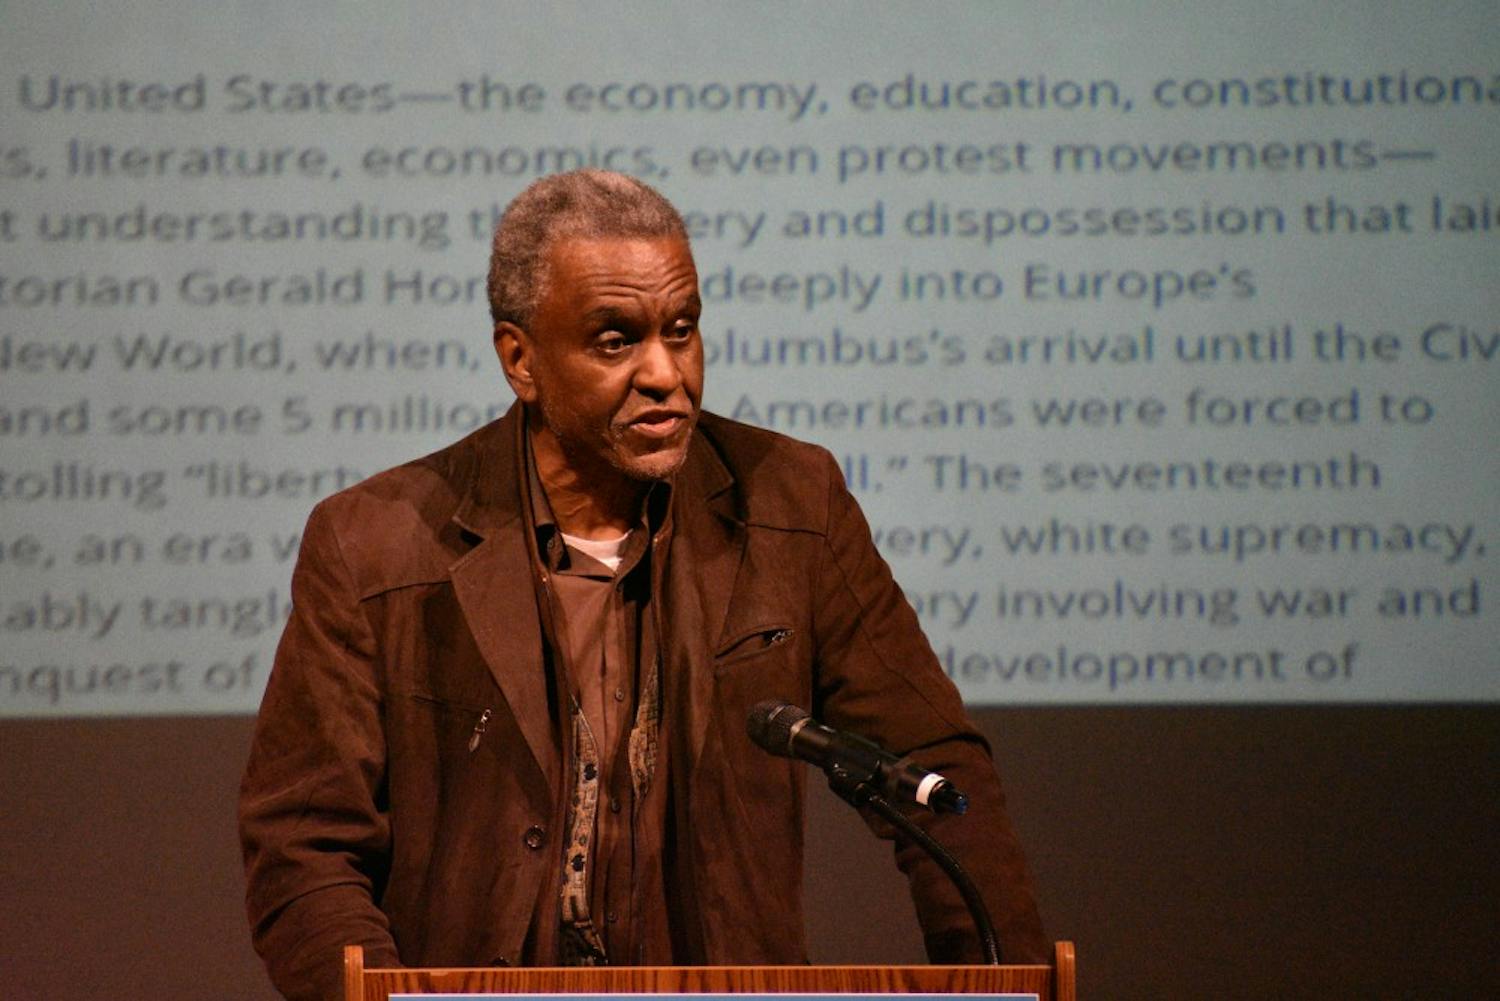 Dr. Gerald C. Horne, J.D., Ph.D., delivers his lecture, "Why Black Lives Do Not Matter: Re-thinking the Origins of the USA".